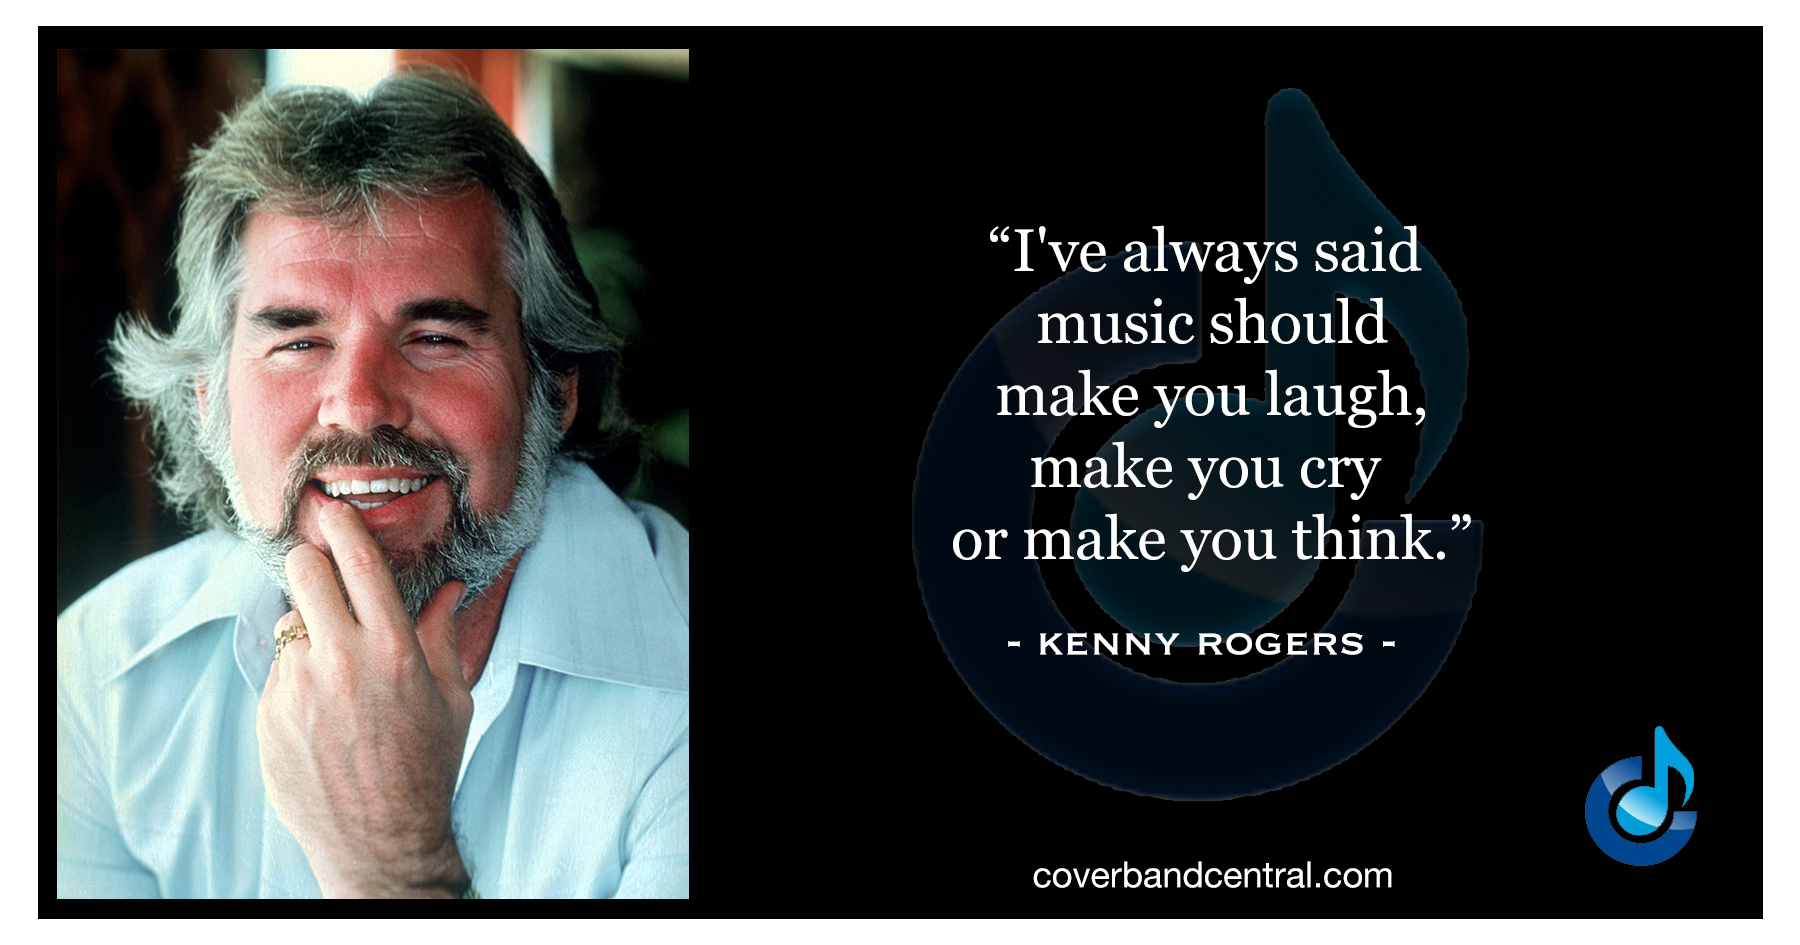 Kenny Rogers quote